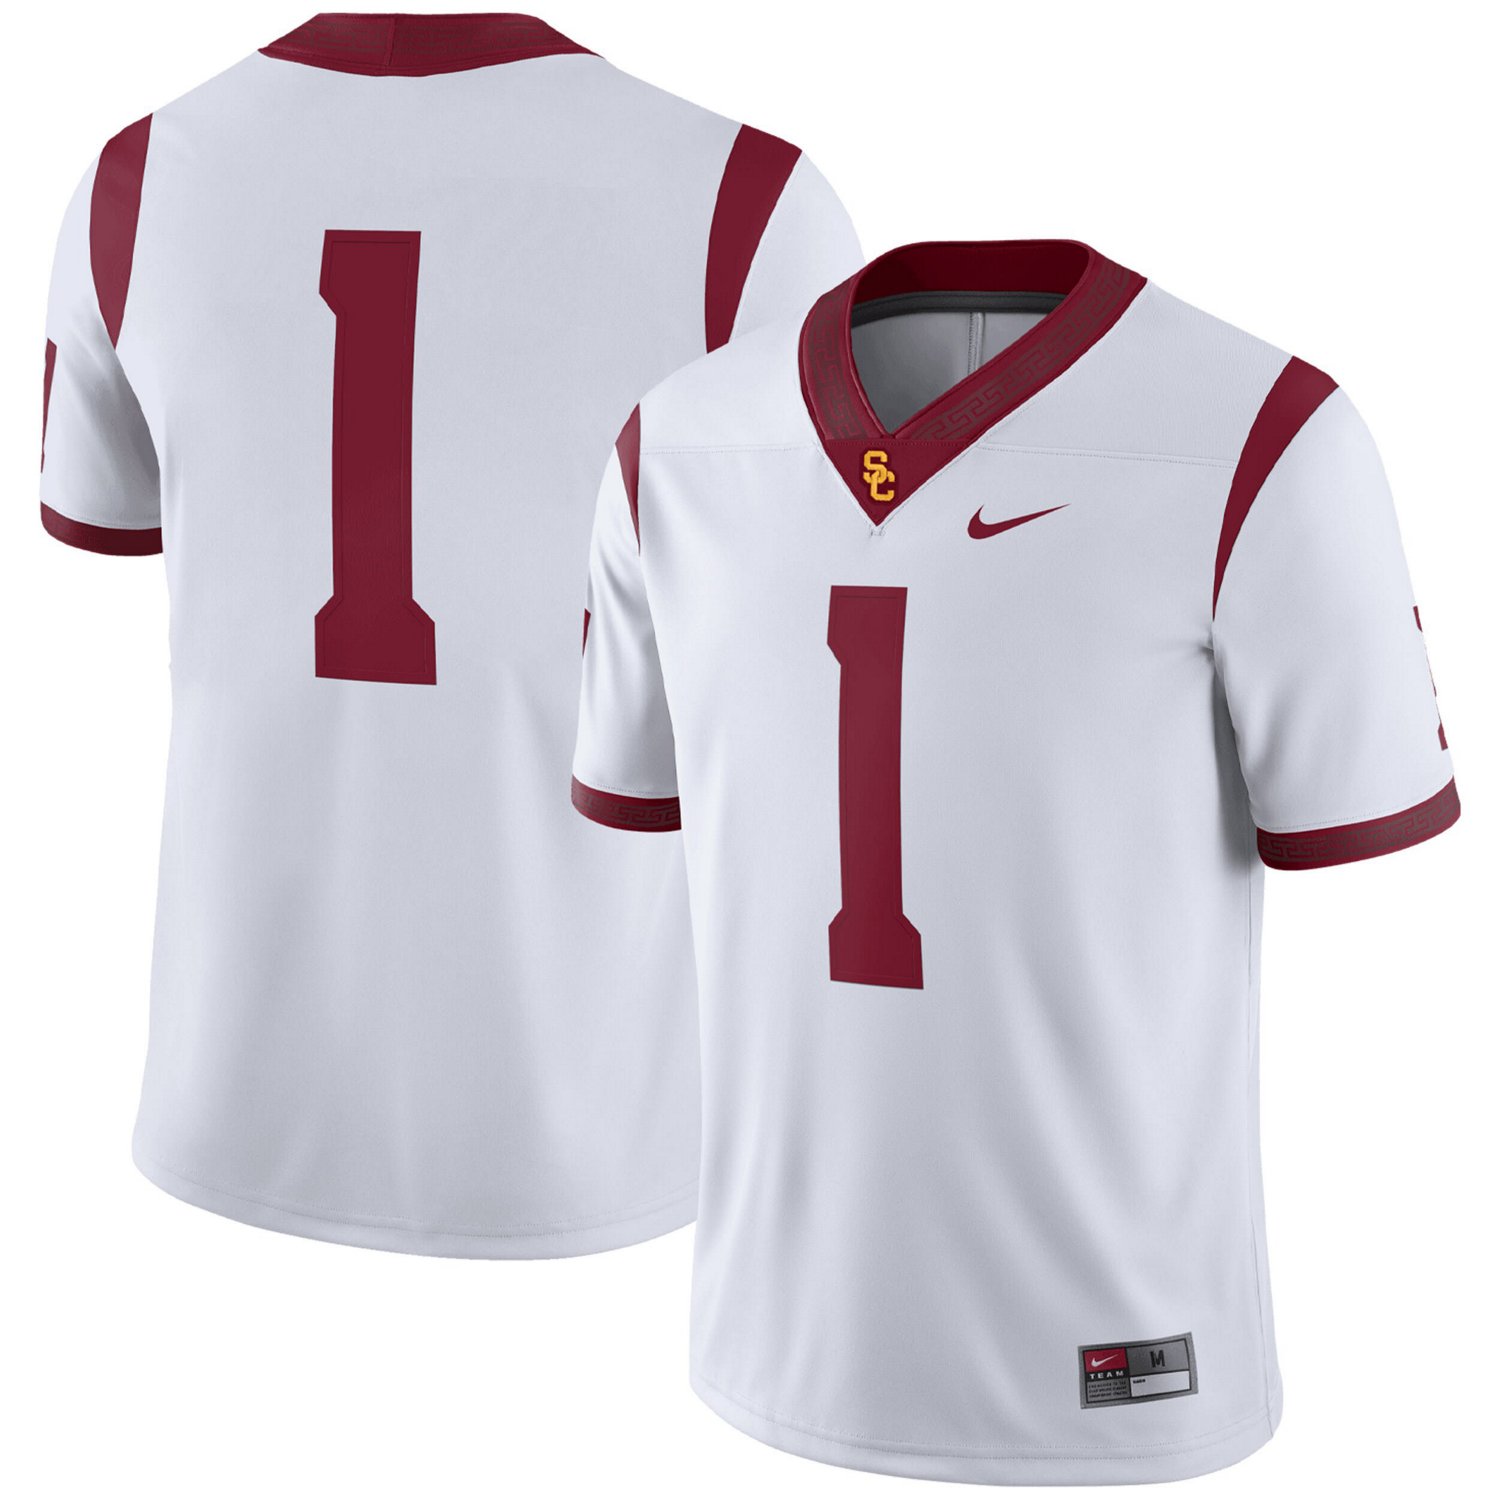 Nike USC Trojans 1 Away Game Jersey | Free Shipping at Academy